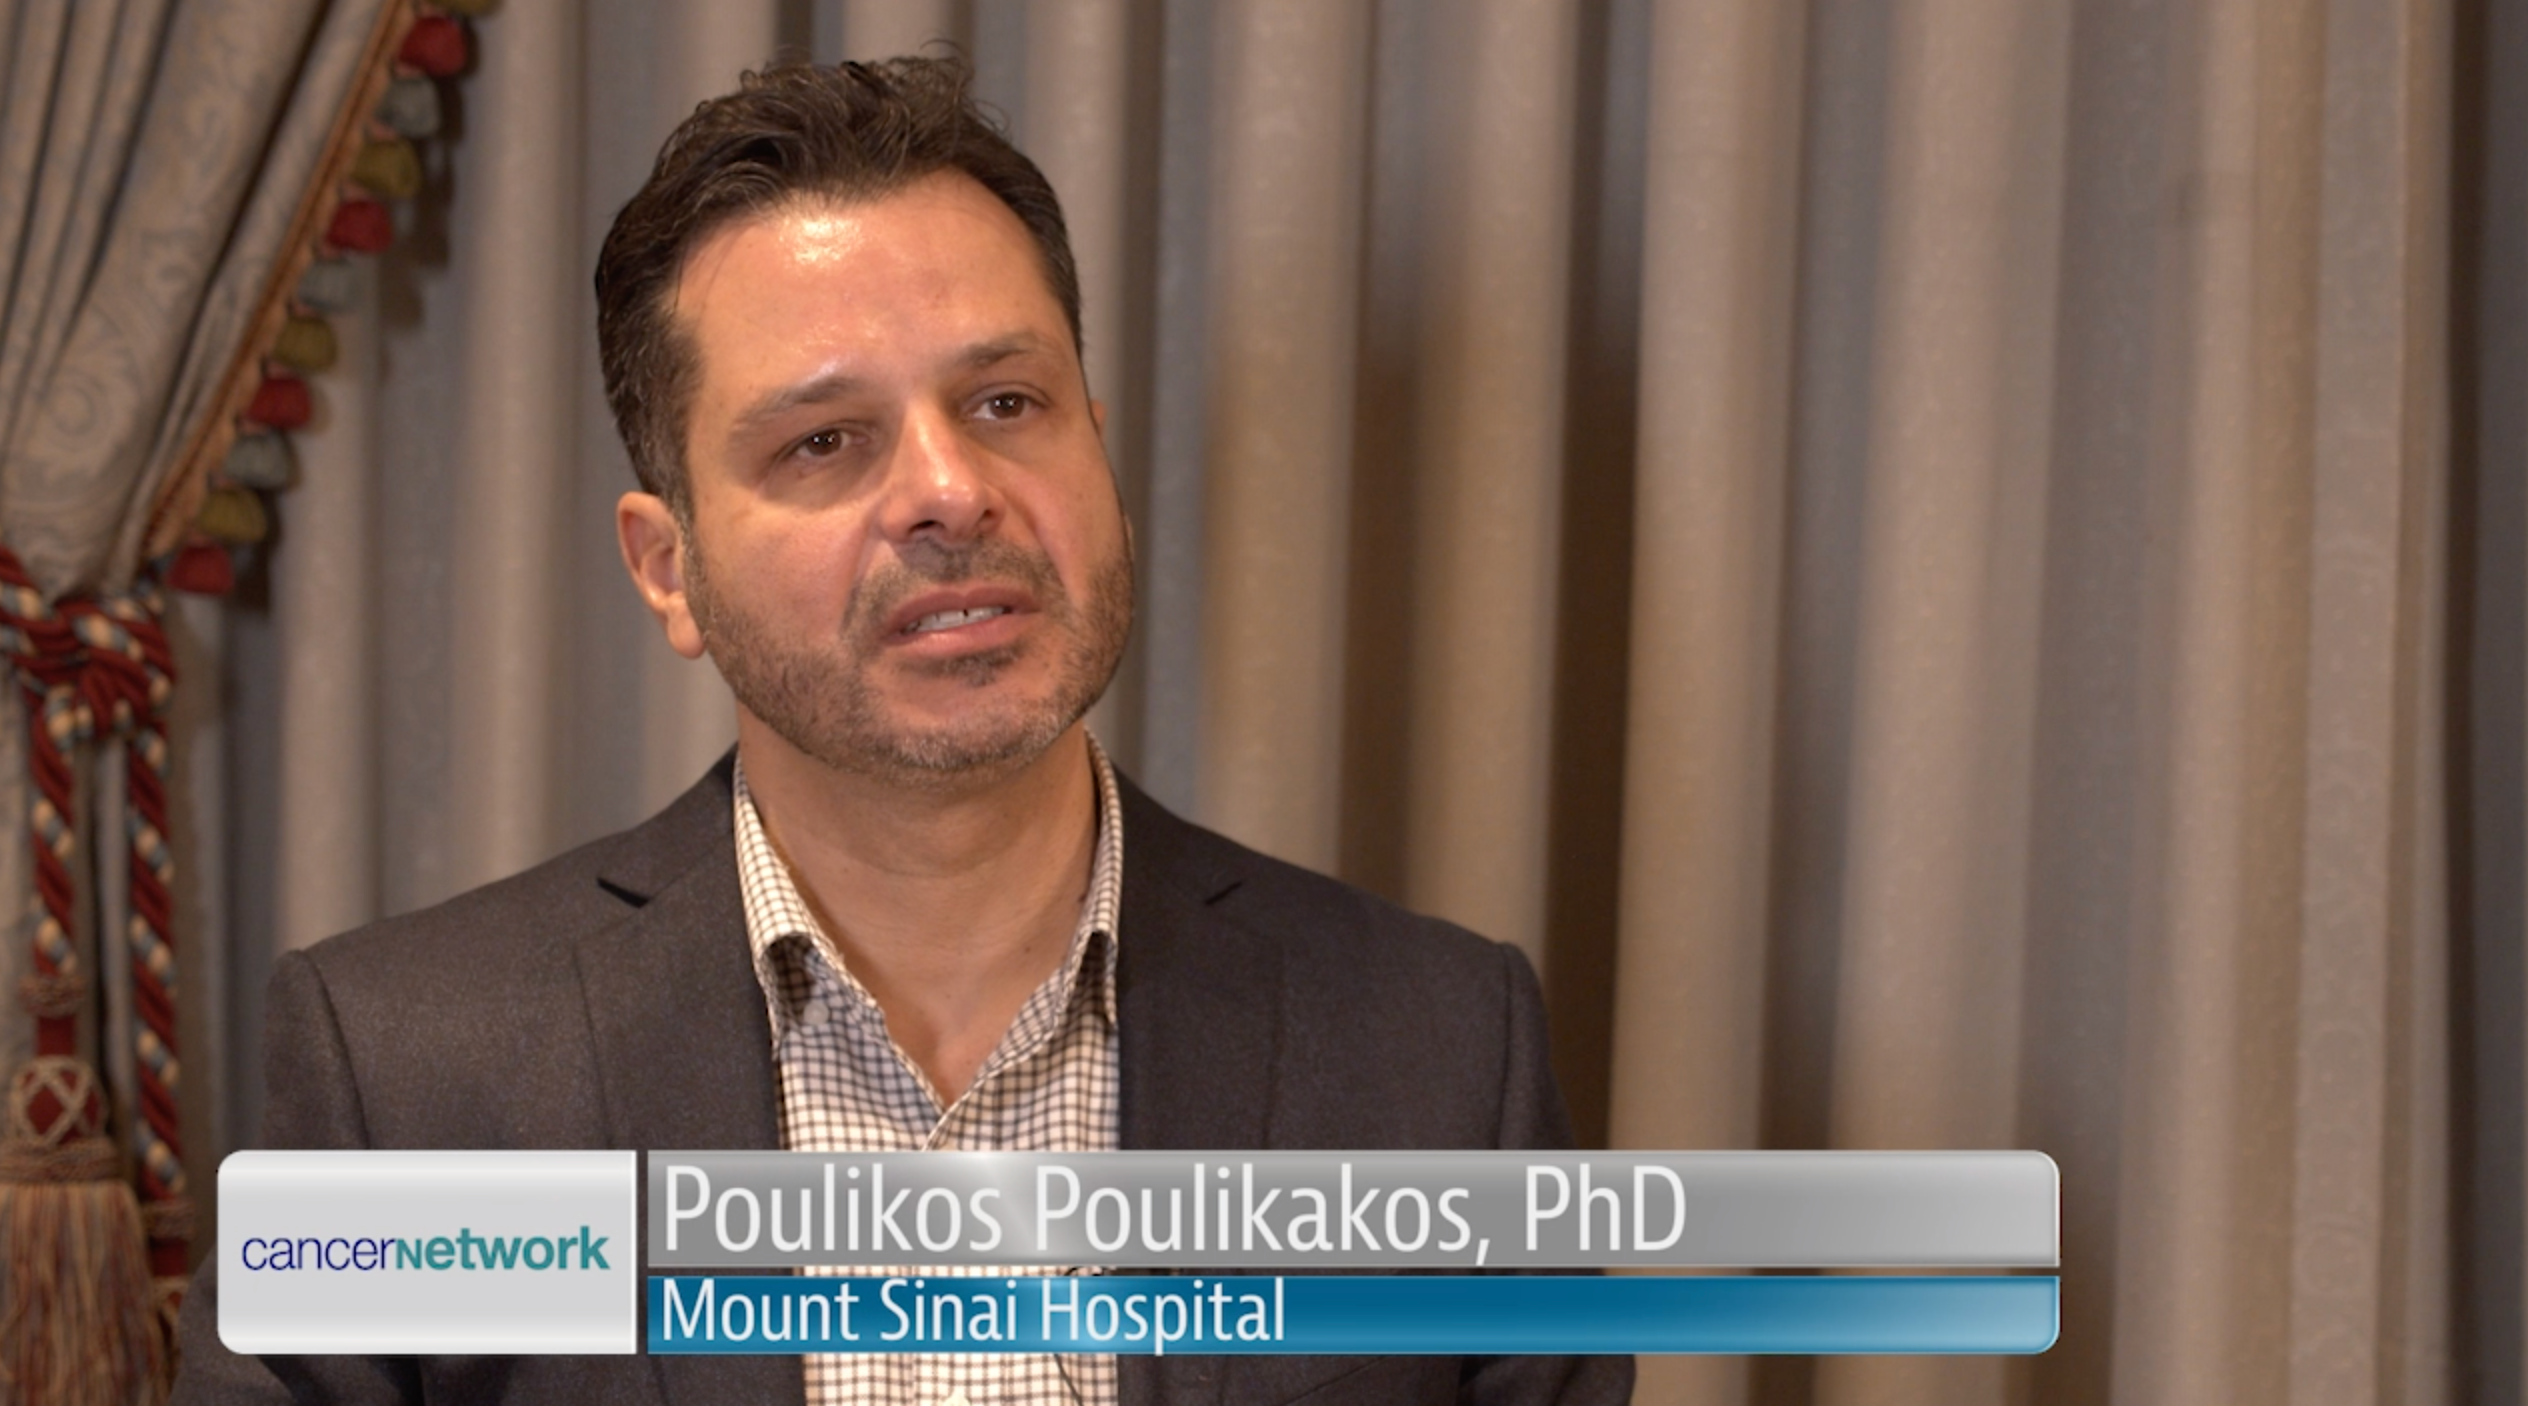 Poulikos Poulikakos, PhD, on Combining Targeted Therapy and Immunotherapy in Melanoma